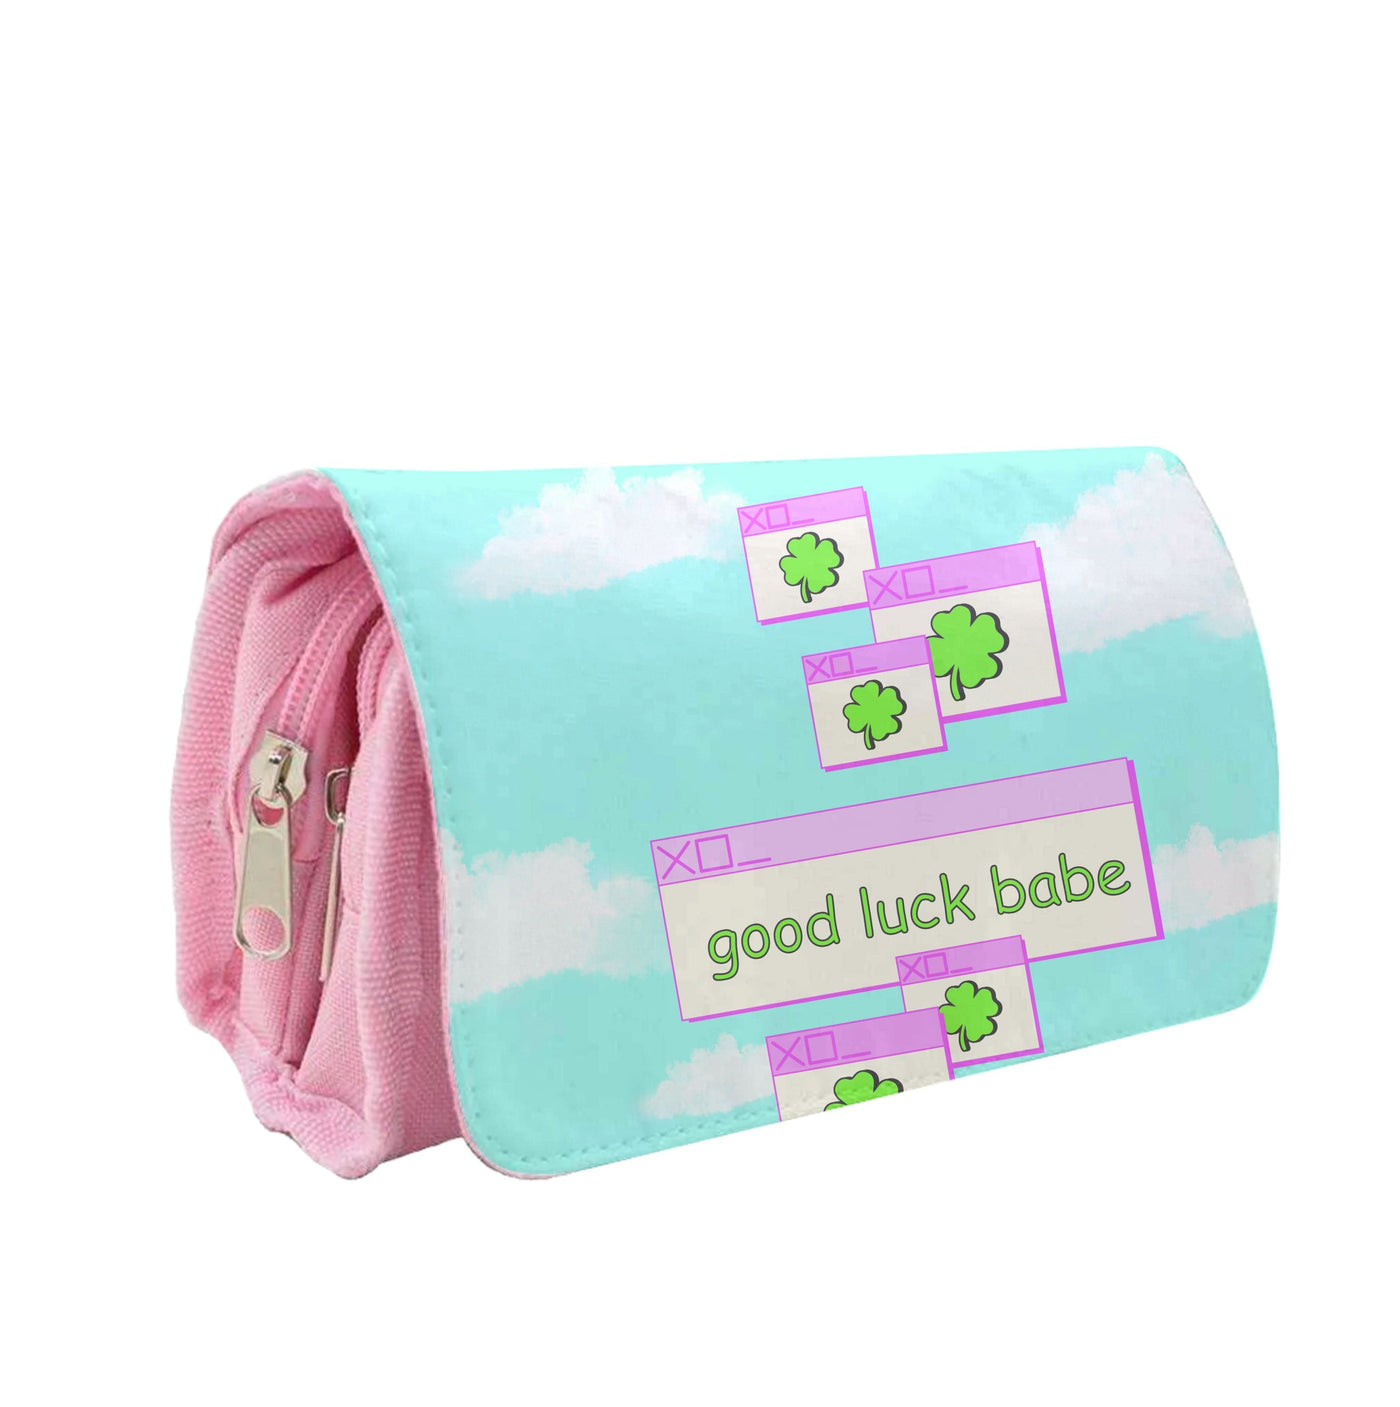 Good Luck Babe - Chappell Roan Pencil Case